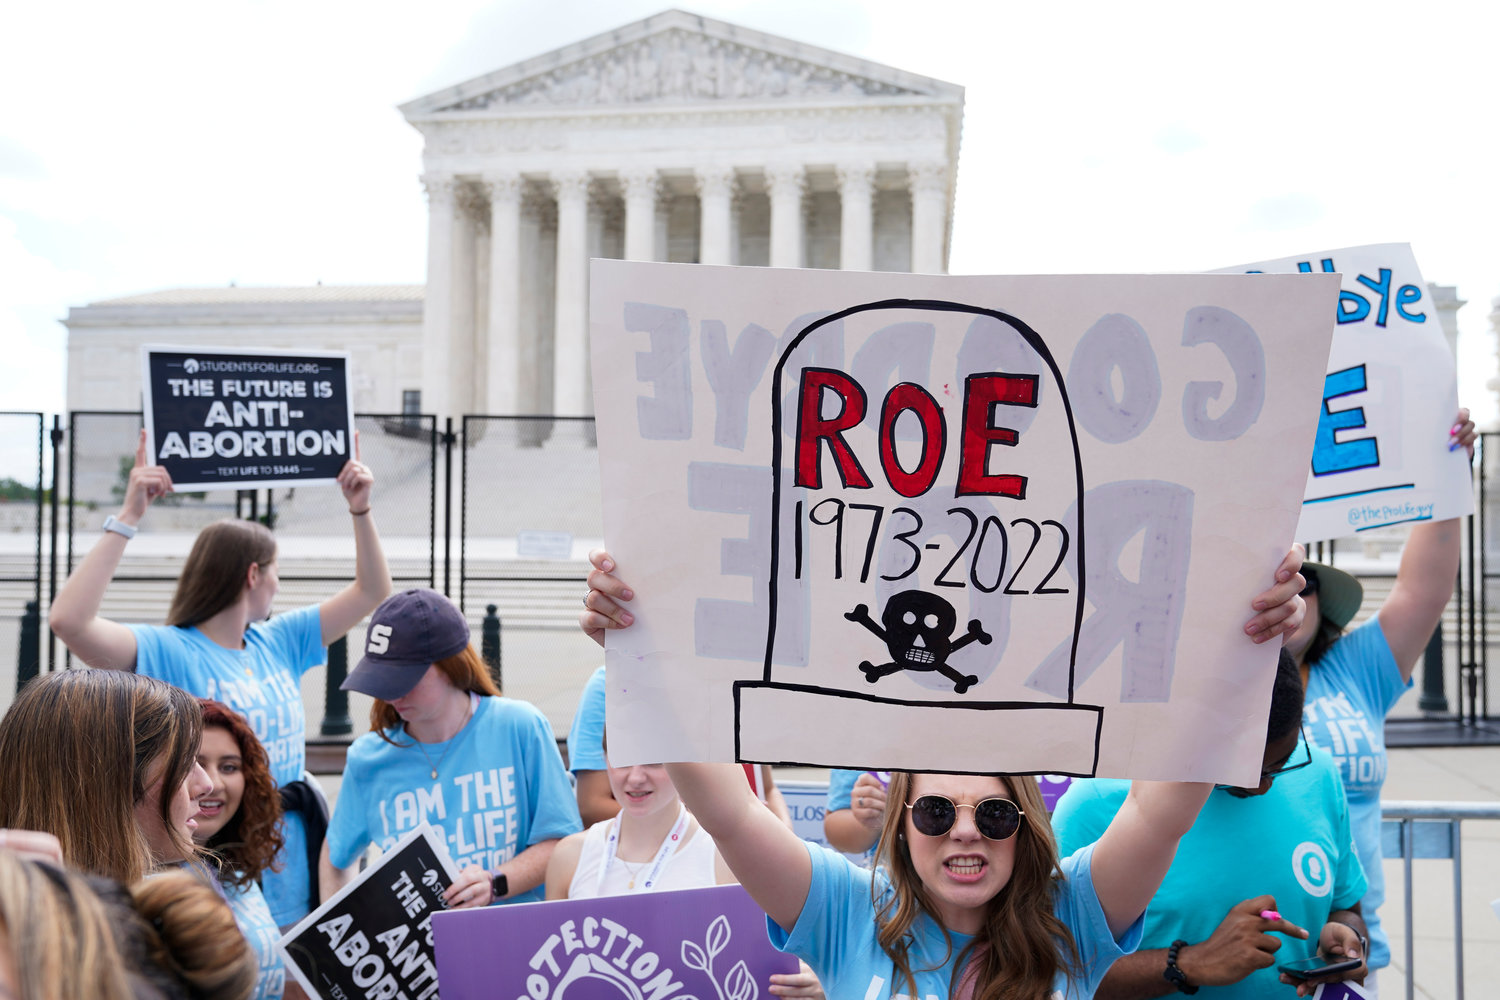 Demonstrators protest about abortion outside the Supreme Court in Washington, Friday, June 24, 2022.¬†(AP Photo/Jacquelyn Martin)